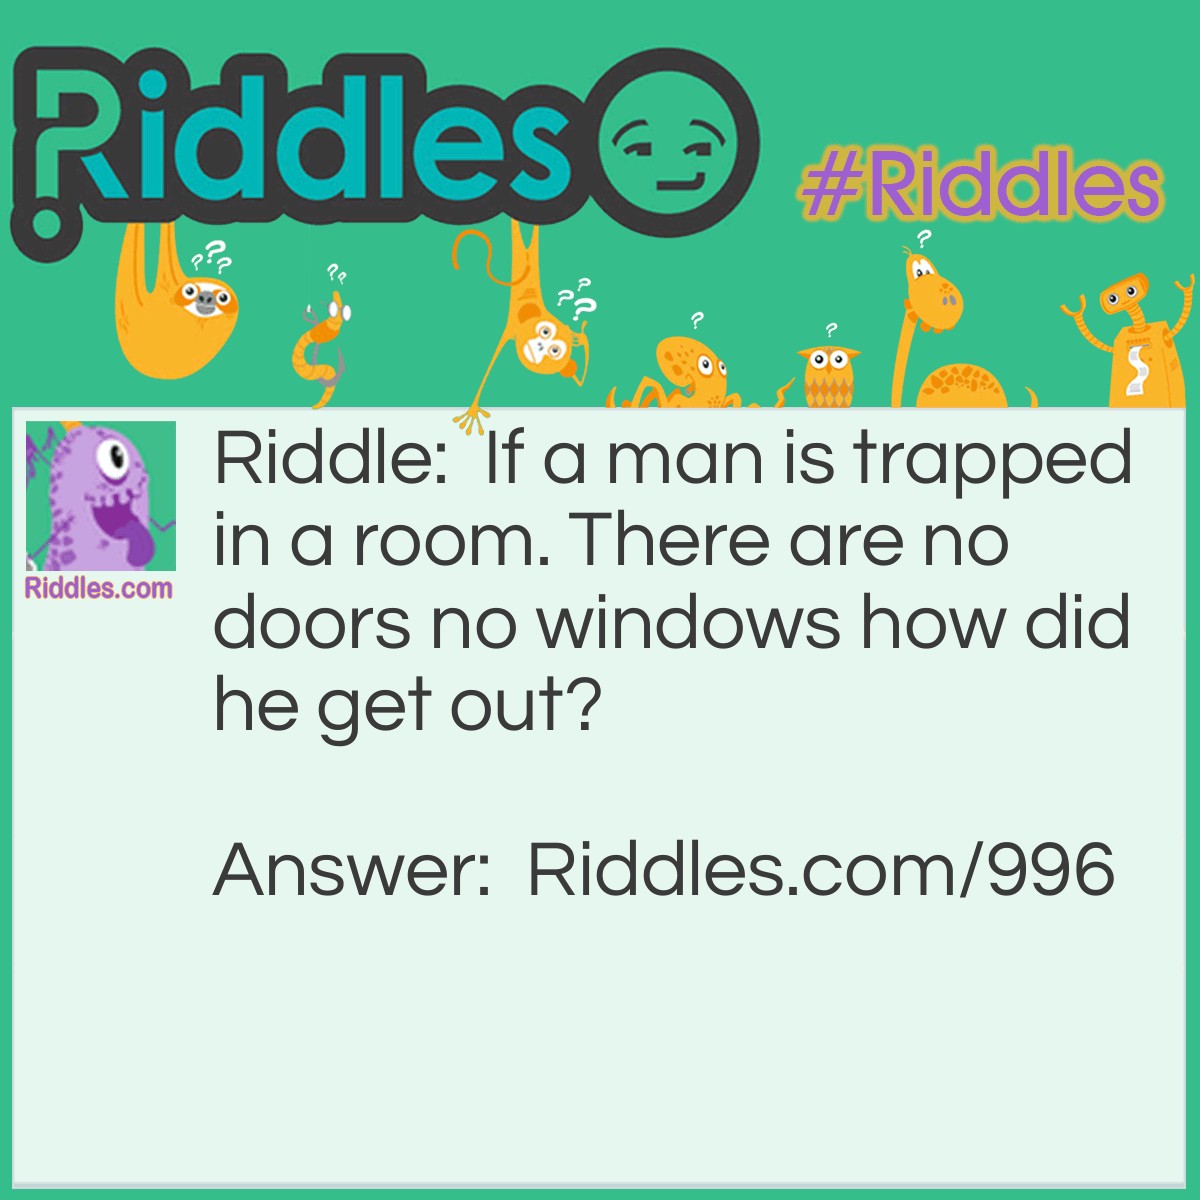 Riddle: If a man is trapped in a room. There are no doors no windows how did he get out? Answer: Through the door way, there are no doors but a door way!